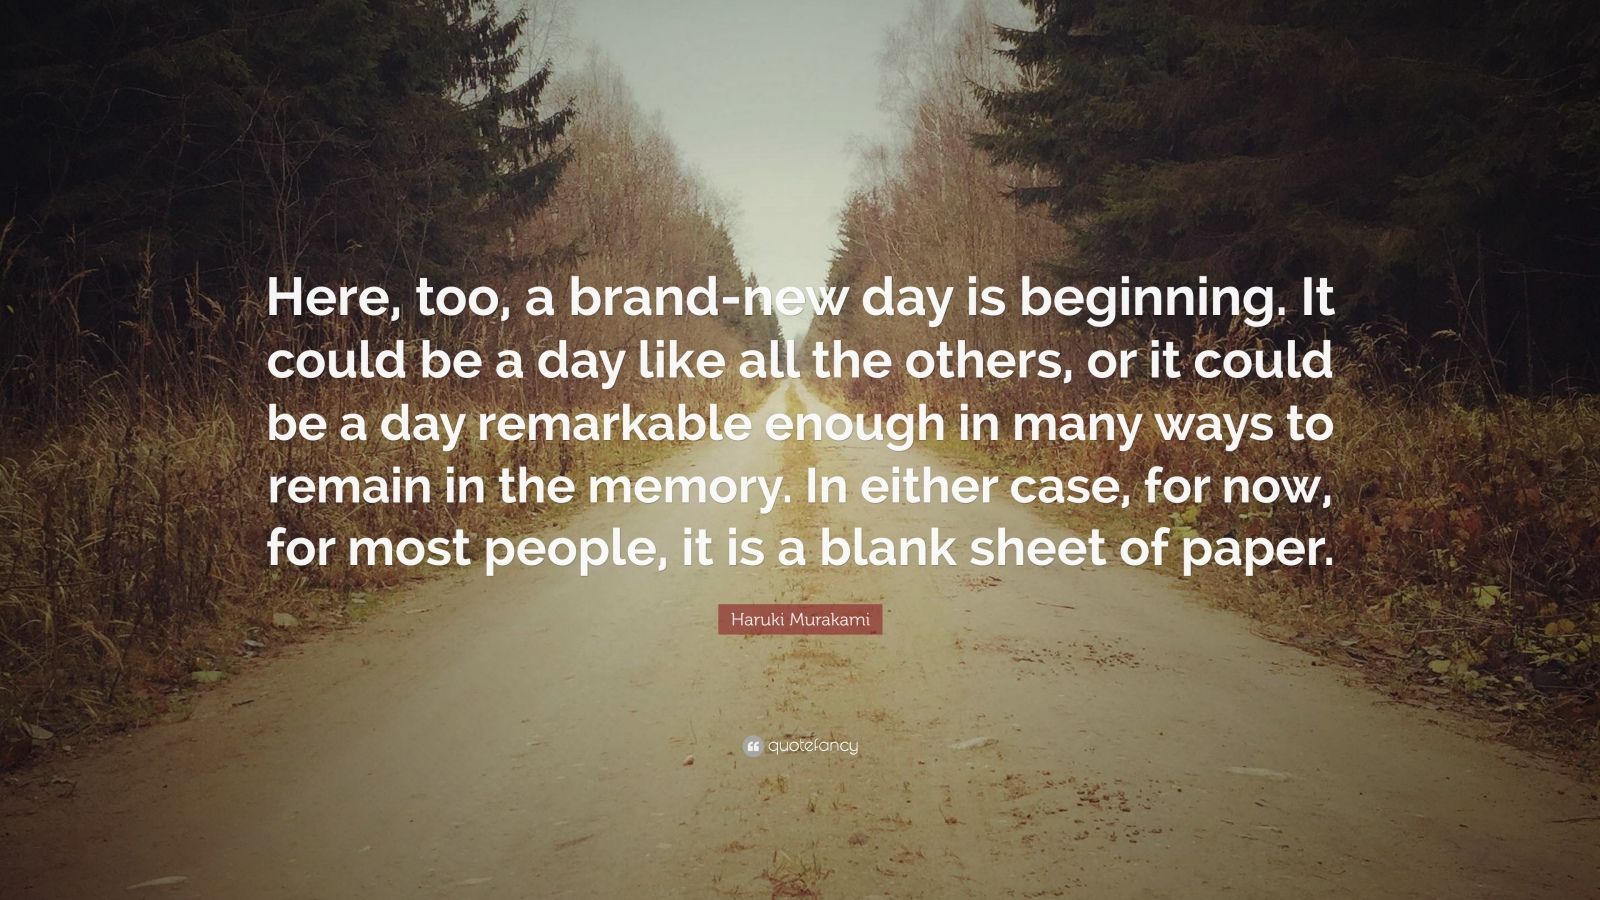 “Here, too, a brand-new day is beginning. It could be a day like all the others, or it could be a day remarkable enough in many ways to remain in the memory. In either case, for now, for most people, it is a blank sheet of paper.”